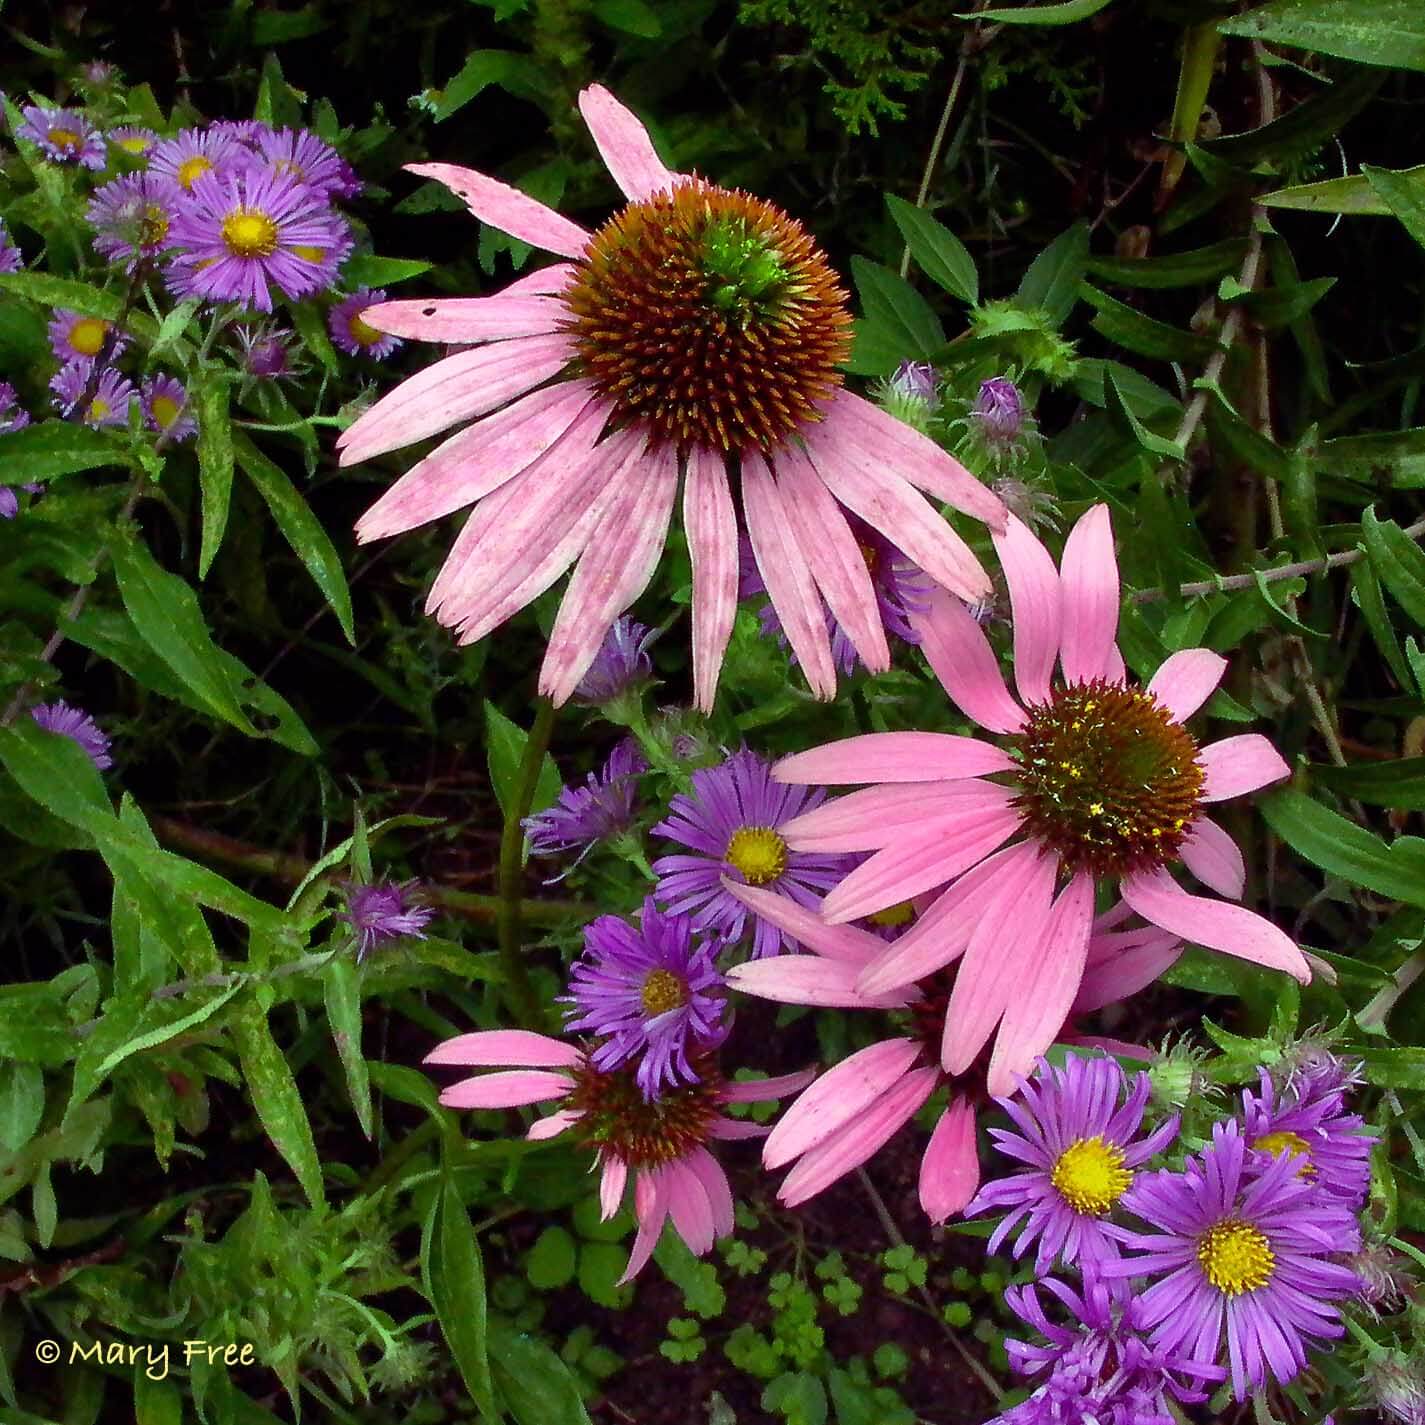 Purple Coneflower/Echinacea Purpurea | An Herb Butterfly And Bee Garden: Herb Gardening with a View Toward Attracting Insect Pollinators